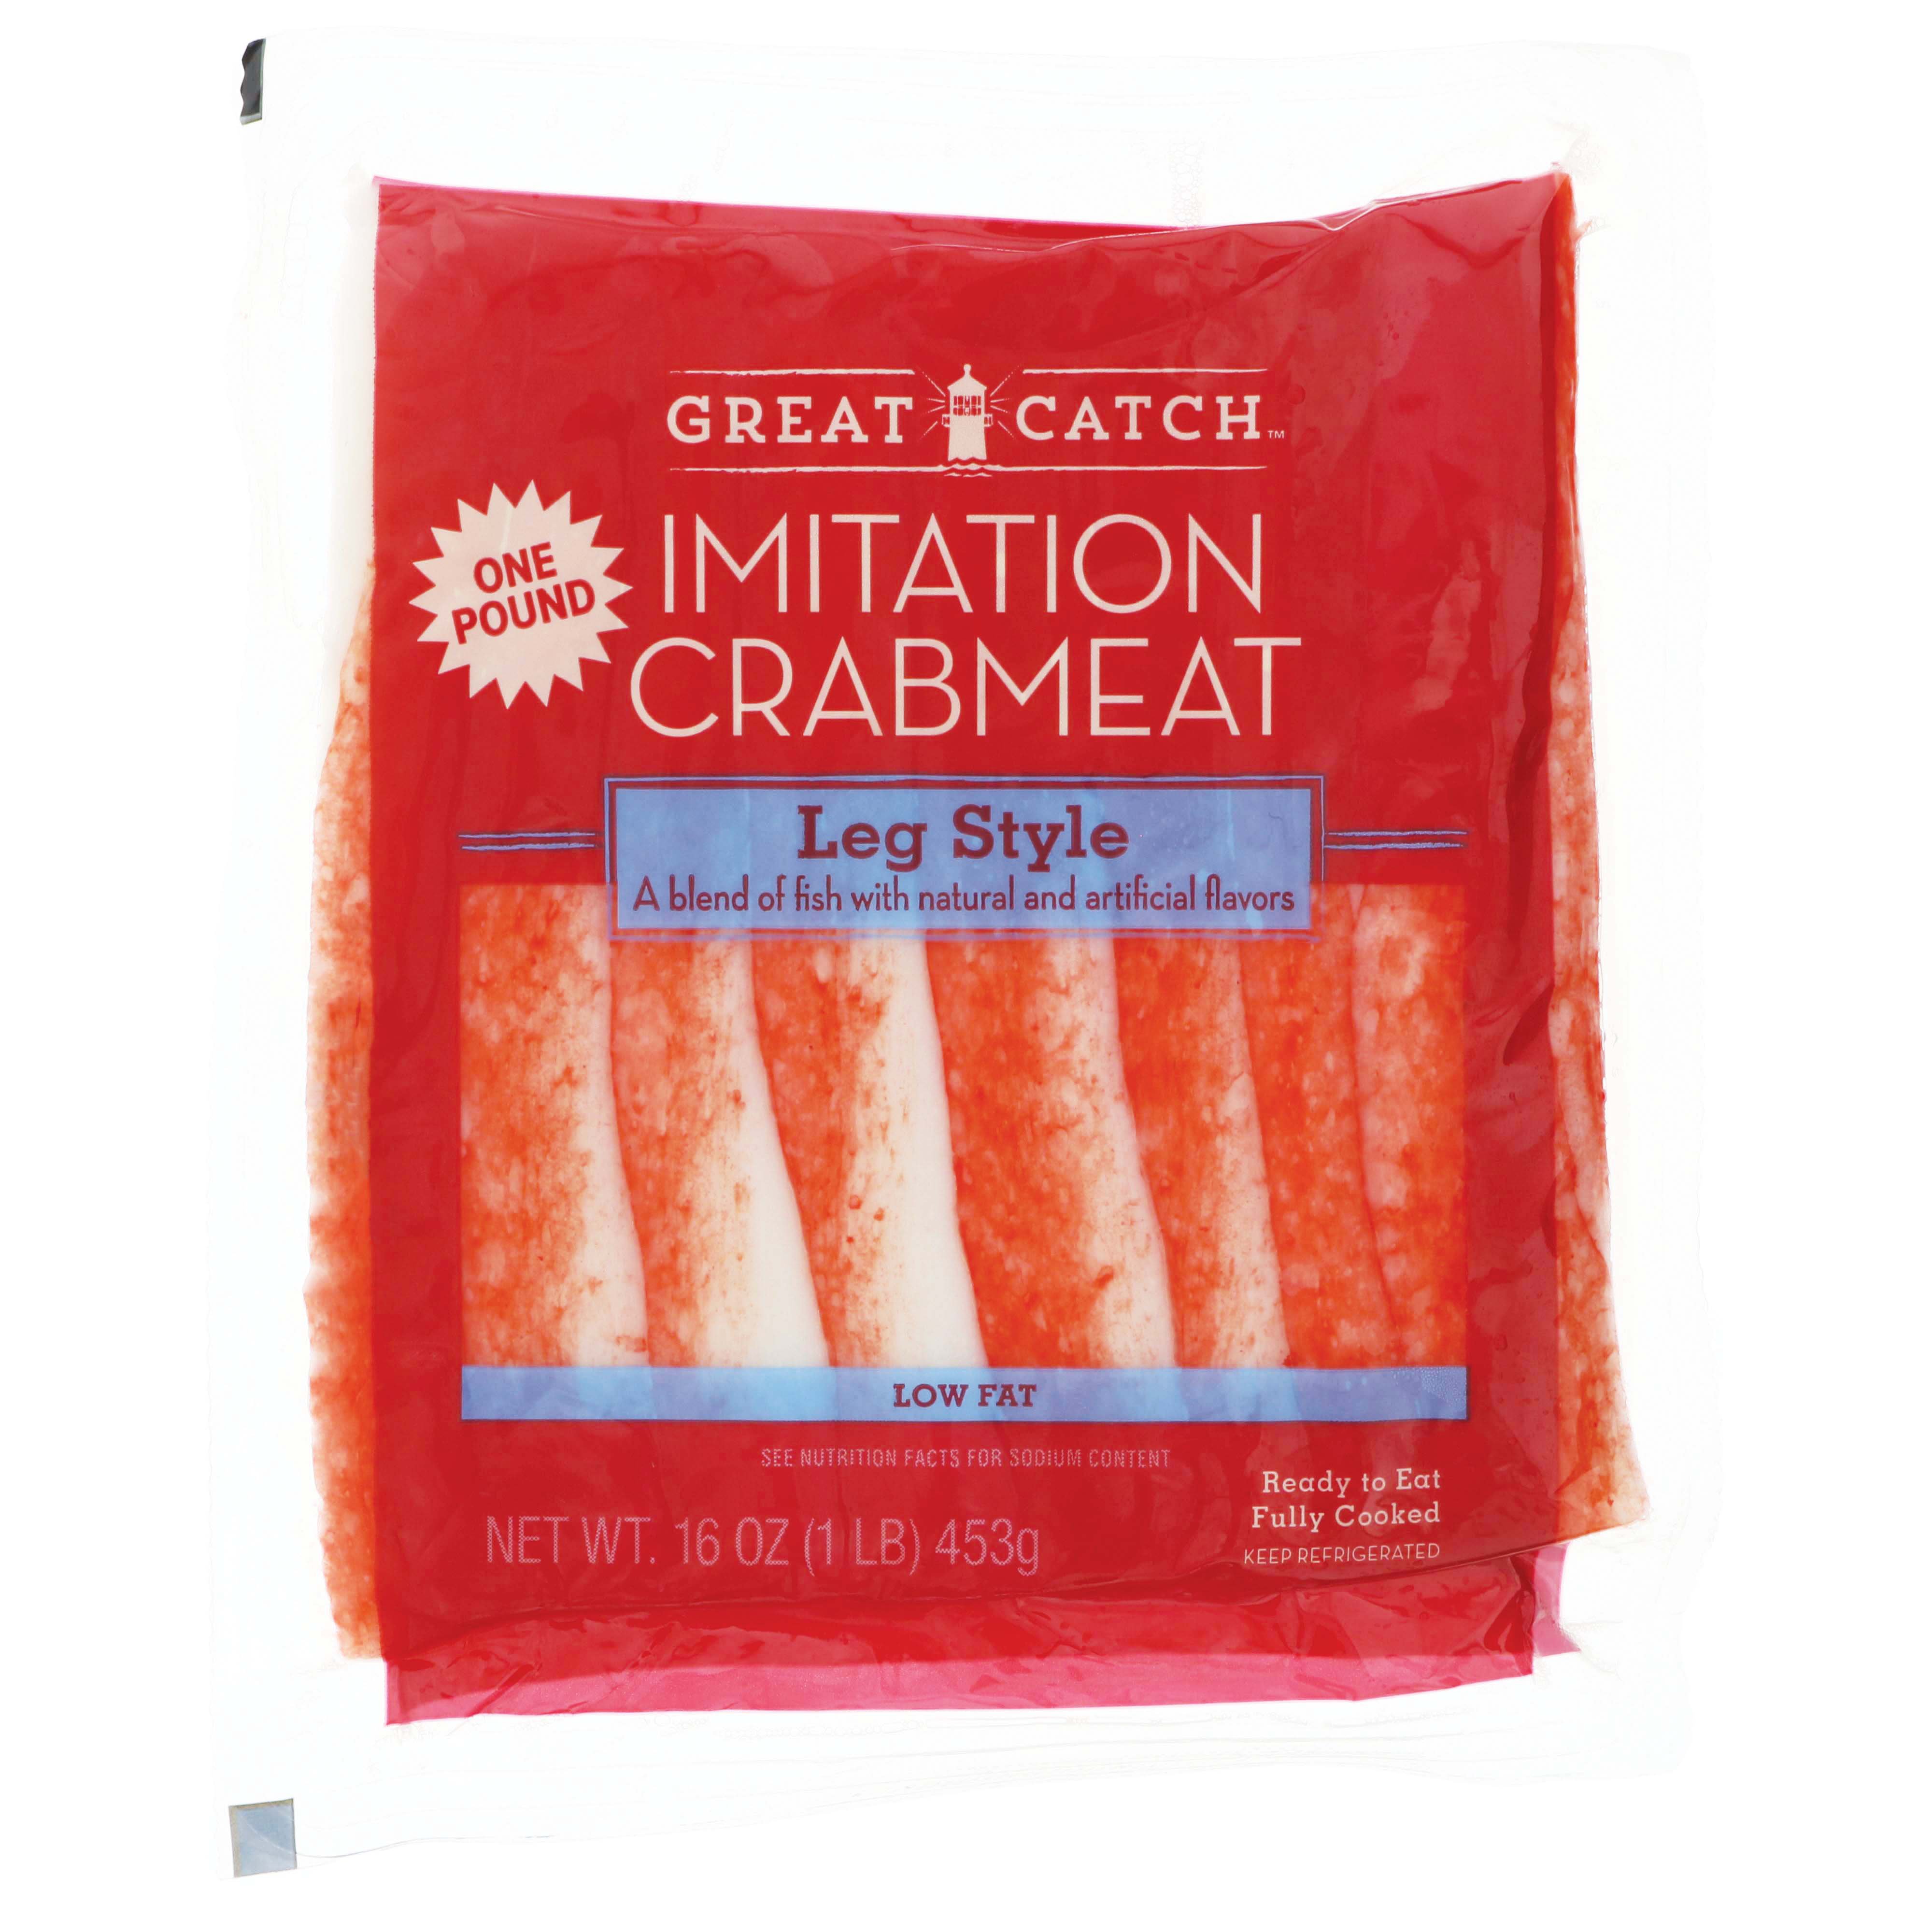 What Is Imitation Crab Meat Made of?